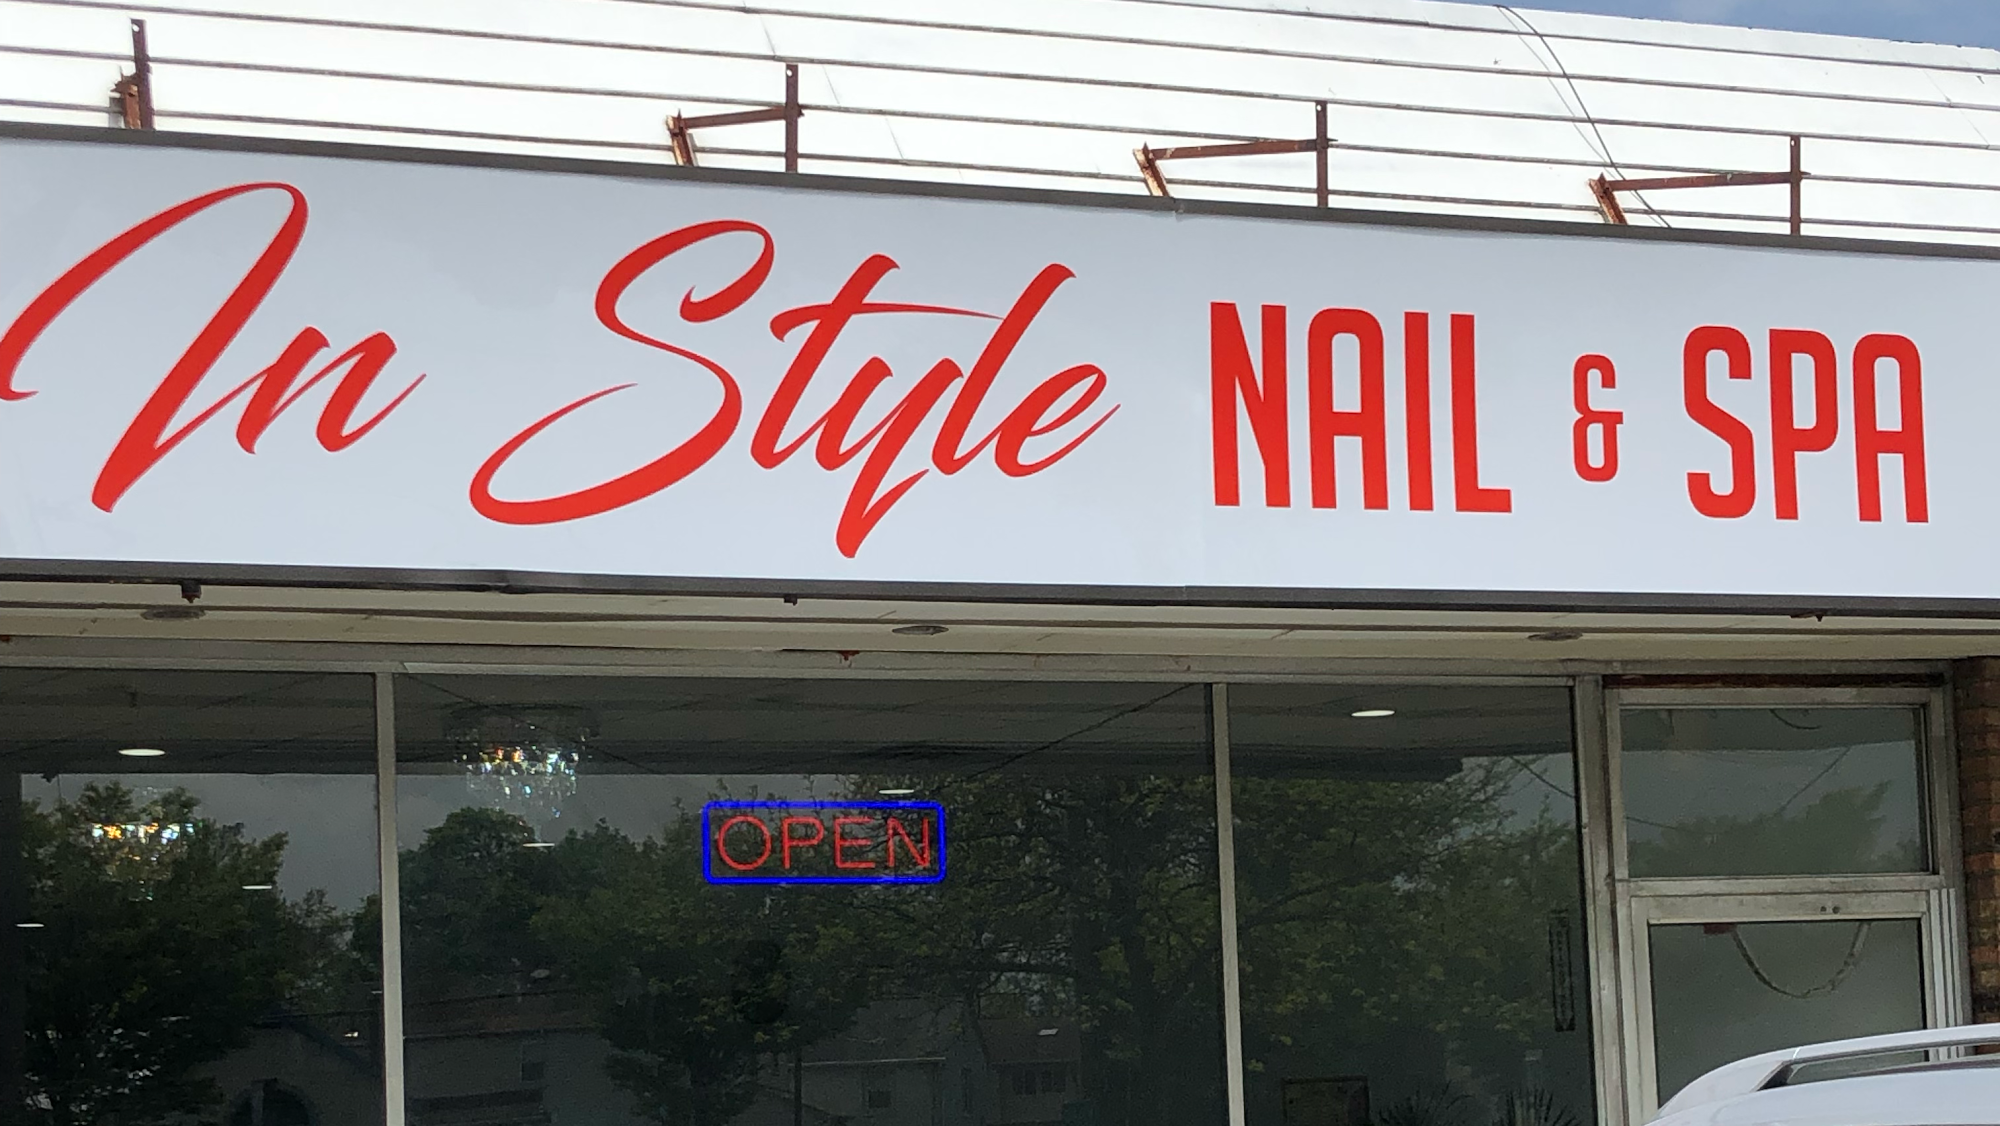 In Style Nail & Spa